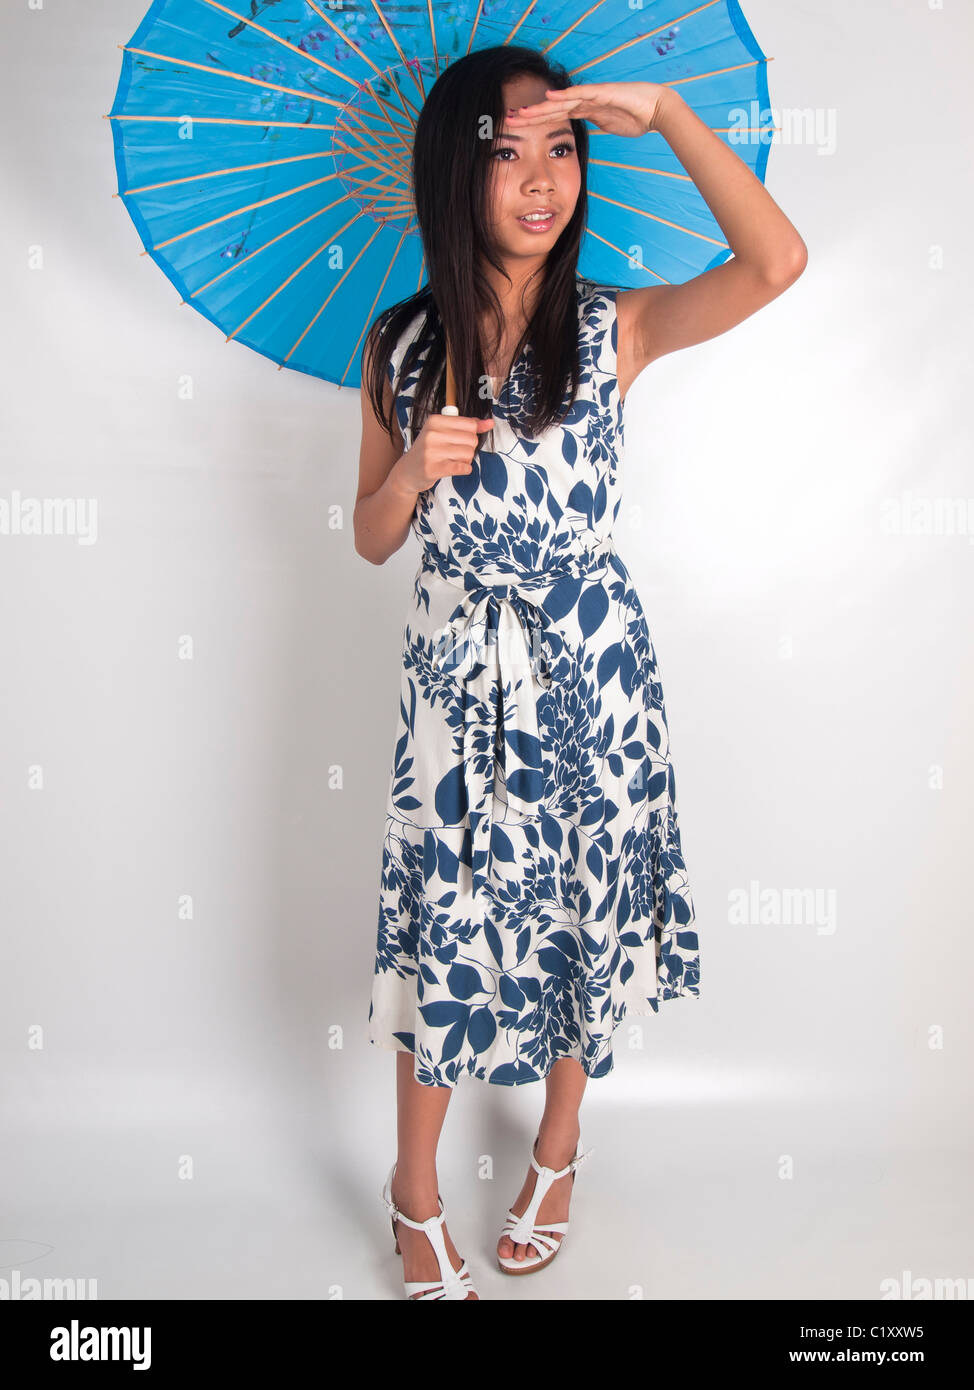 A young girl under a blue umbrella looking out for something Stock Photo